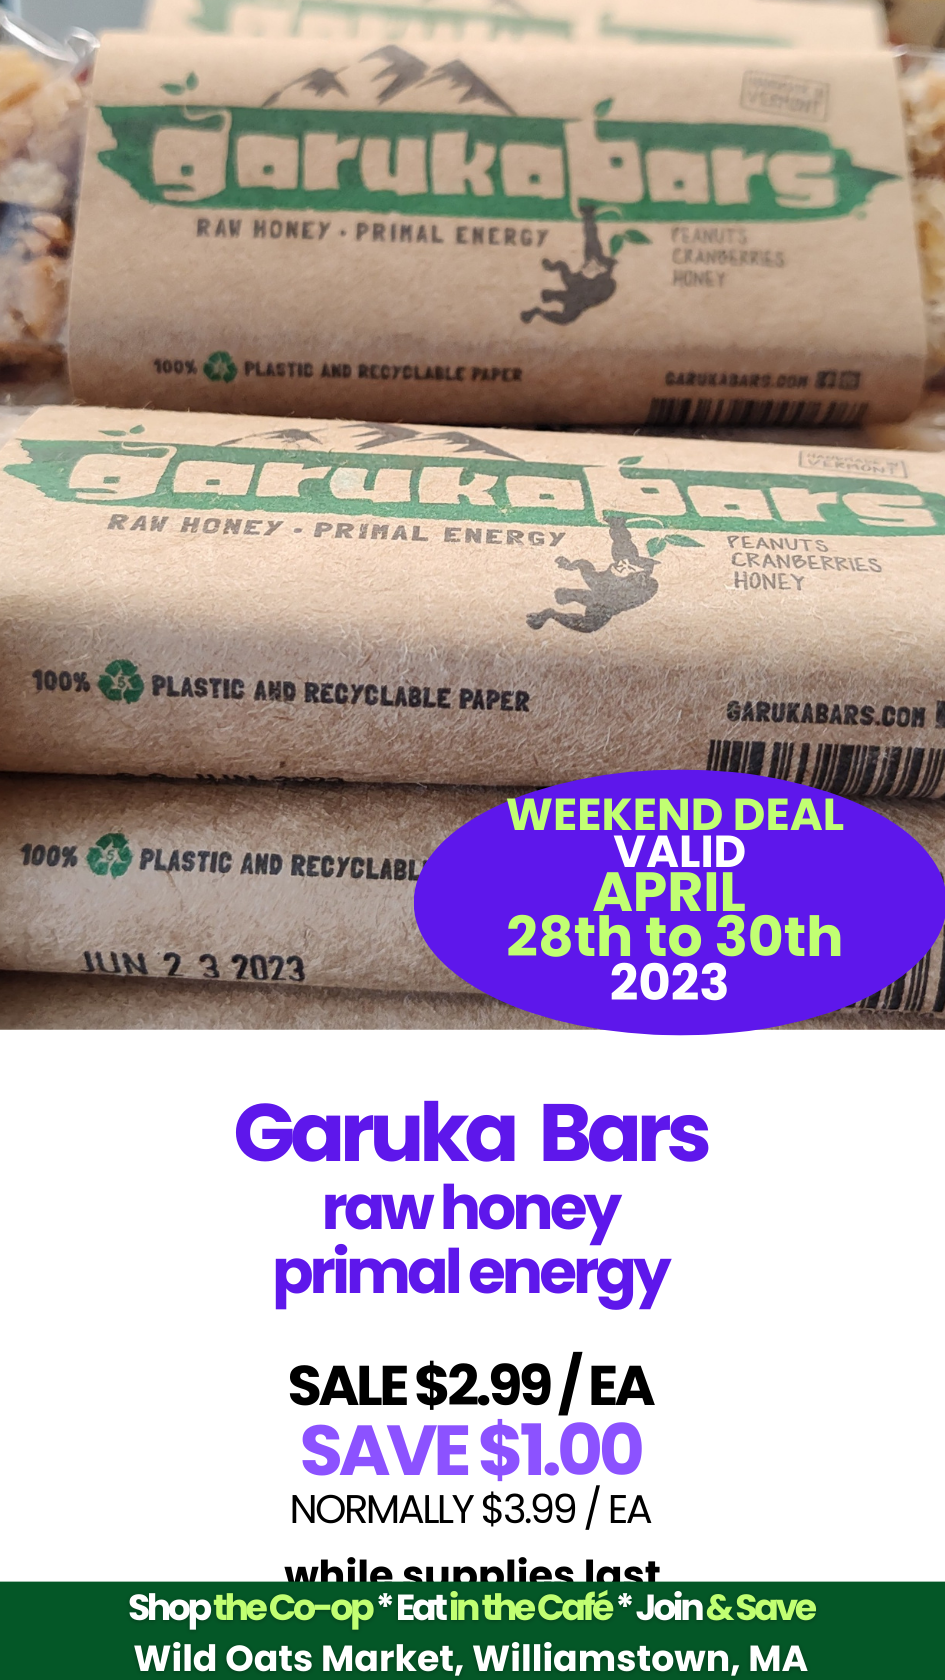 Wild Oats Market Weekly Update APR 28 to MAY GAURKA BARS.png